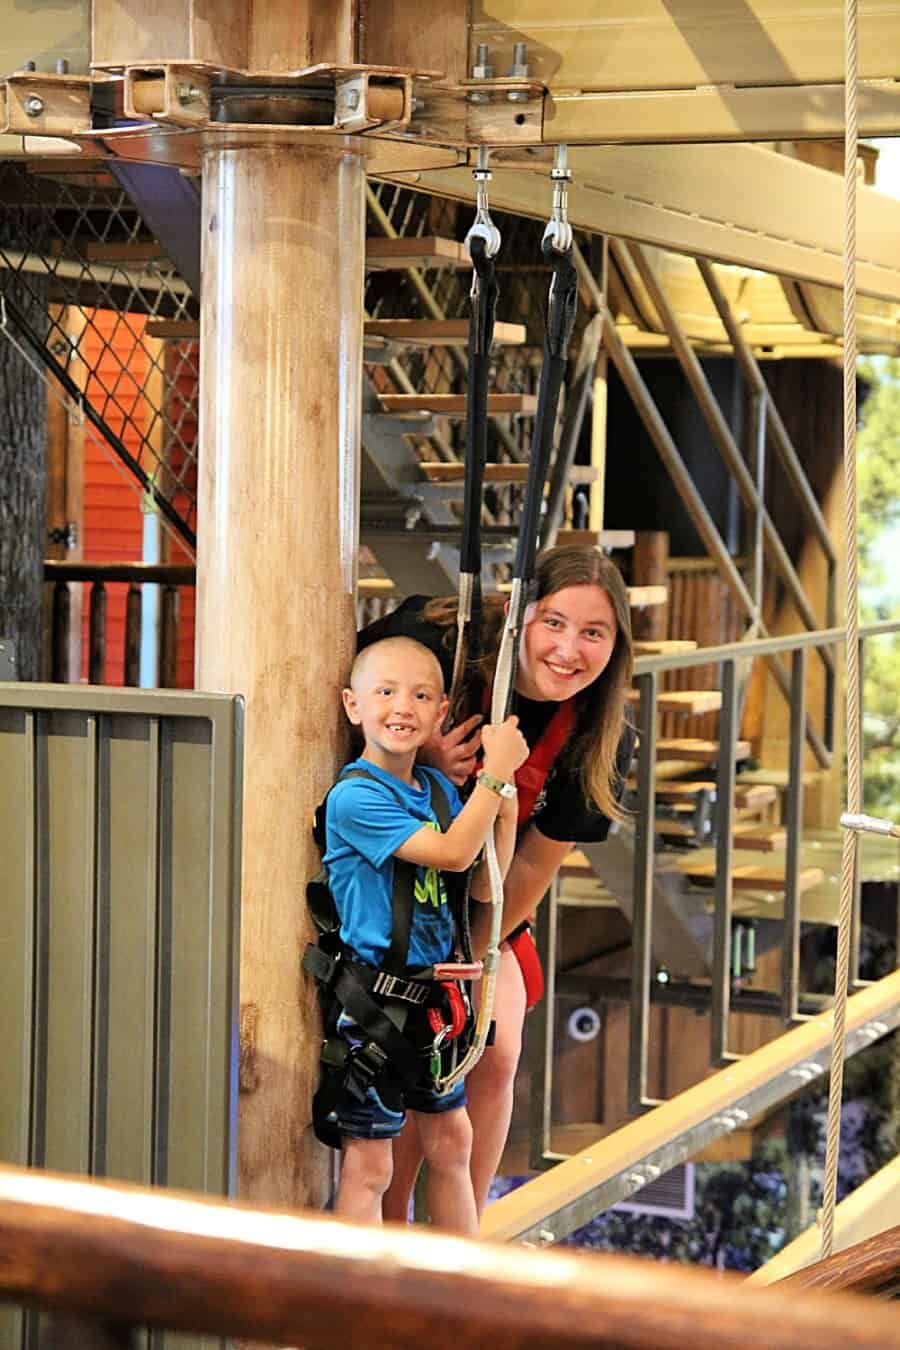 Did You Know Great Wolf Lodge Day Passes Are Now Available!? - Our visit to Great Wolf Lodge Resort & Water Park